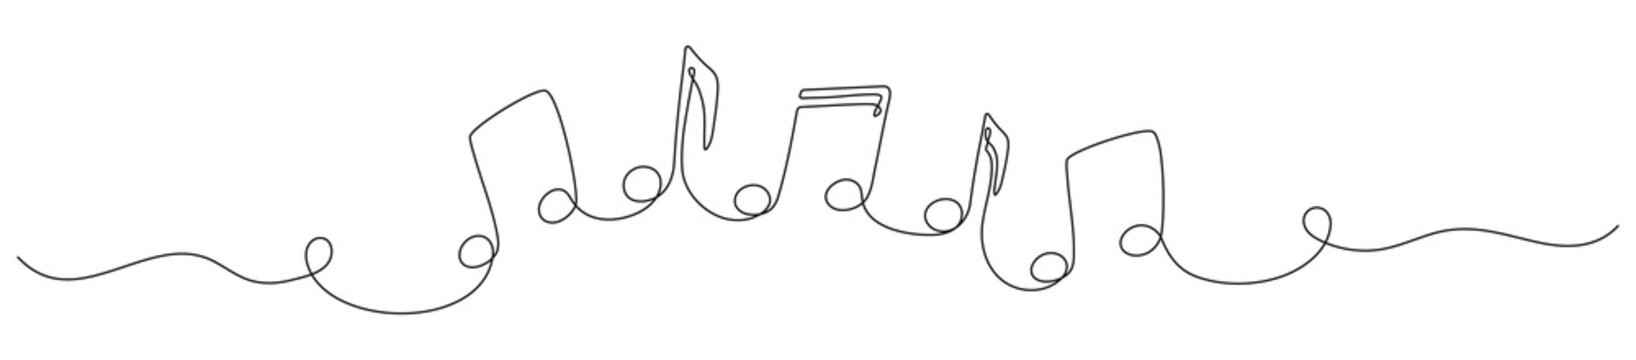 Music notes continuous one line drawing. Vector isolated on white.